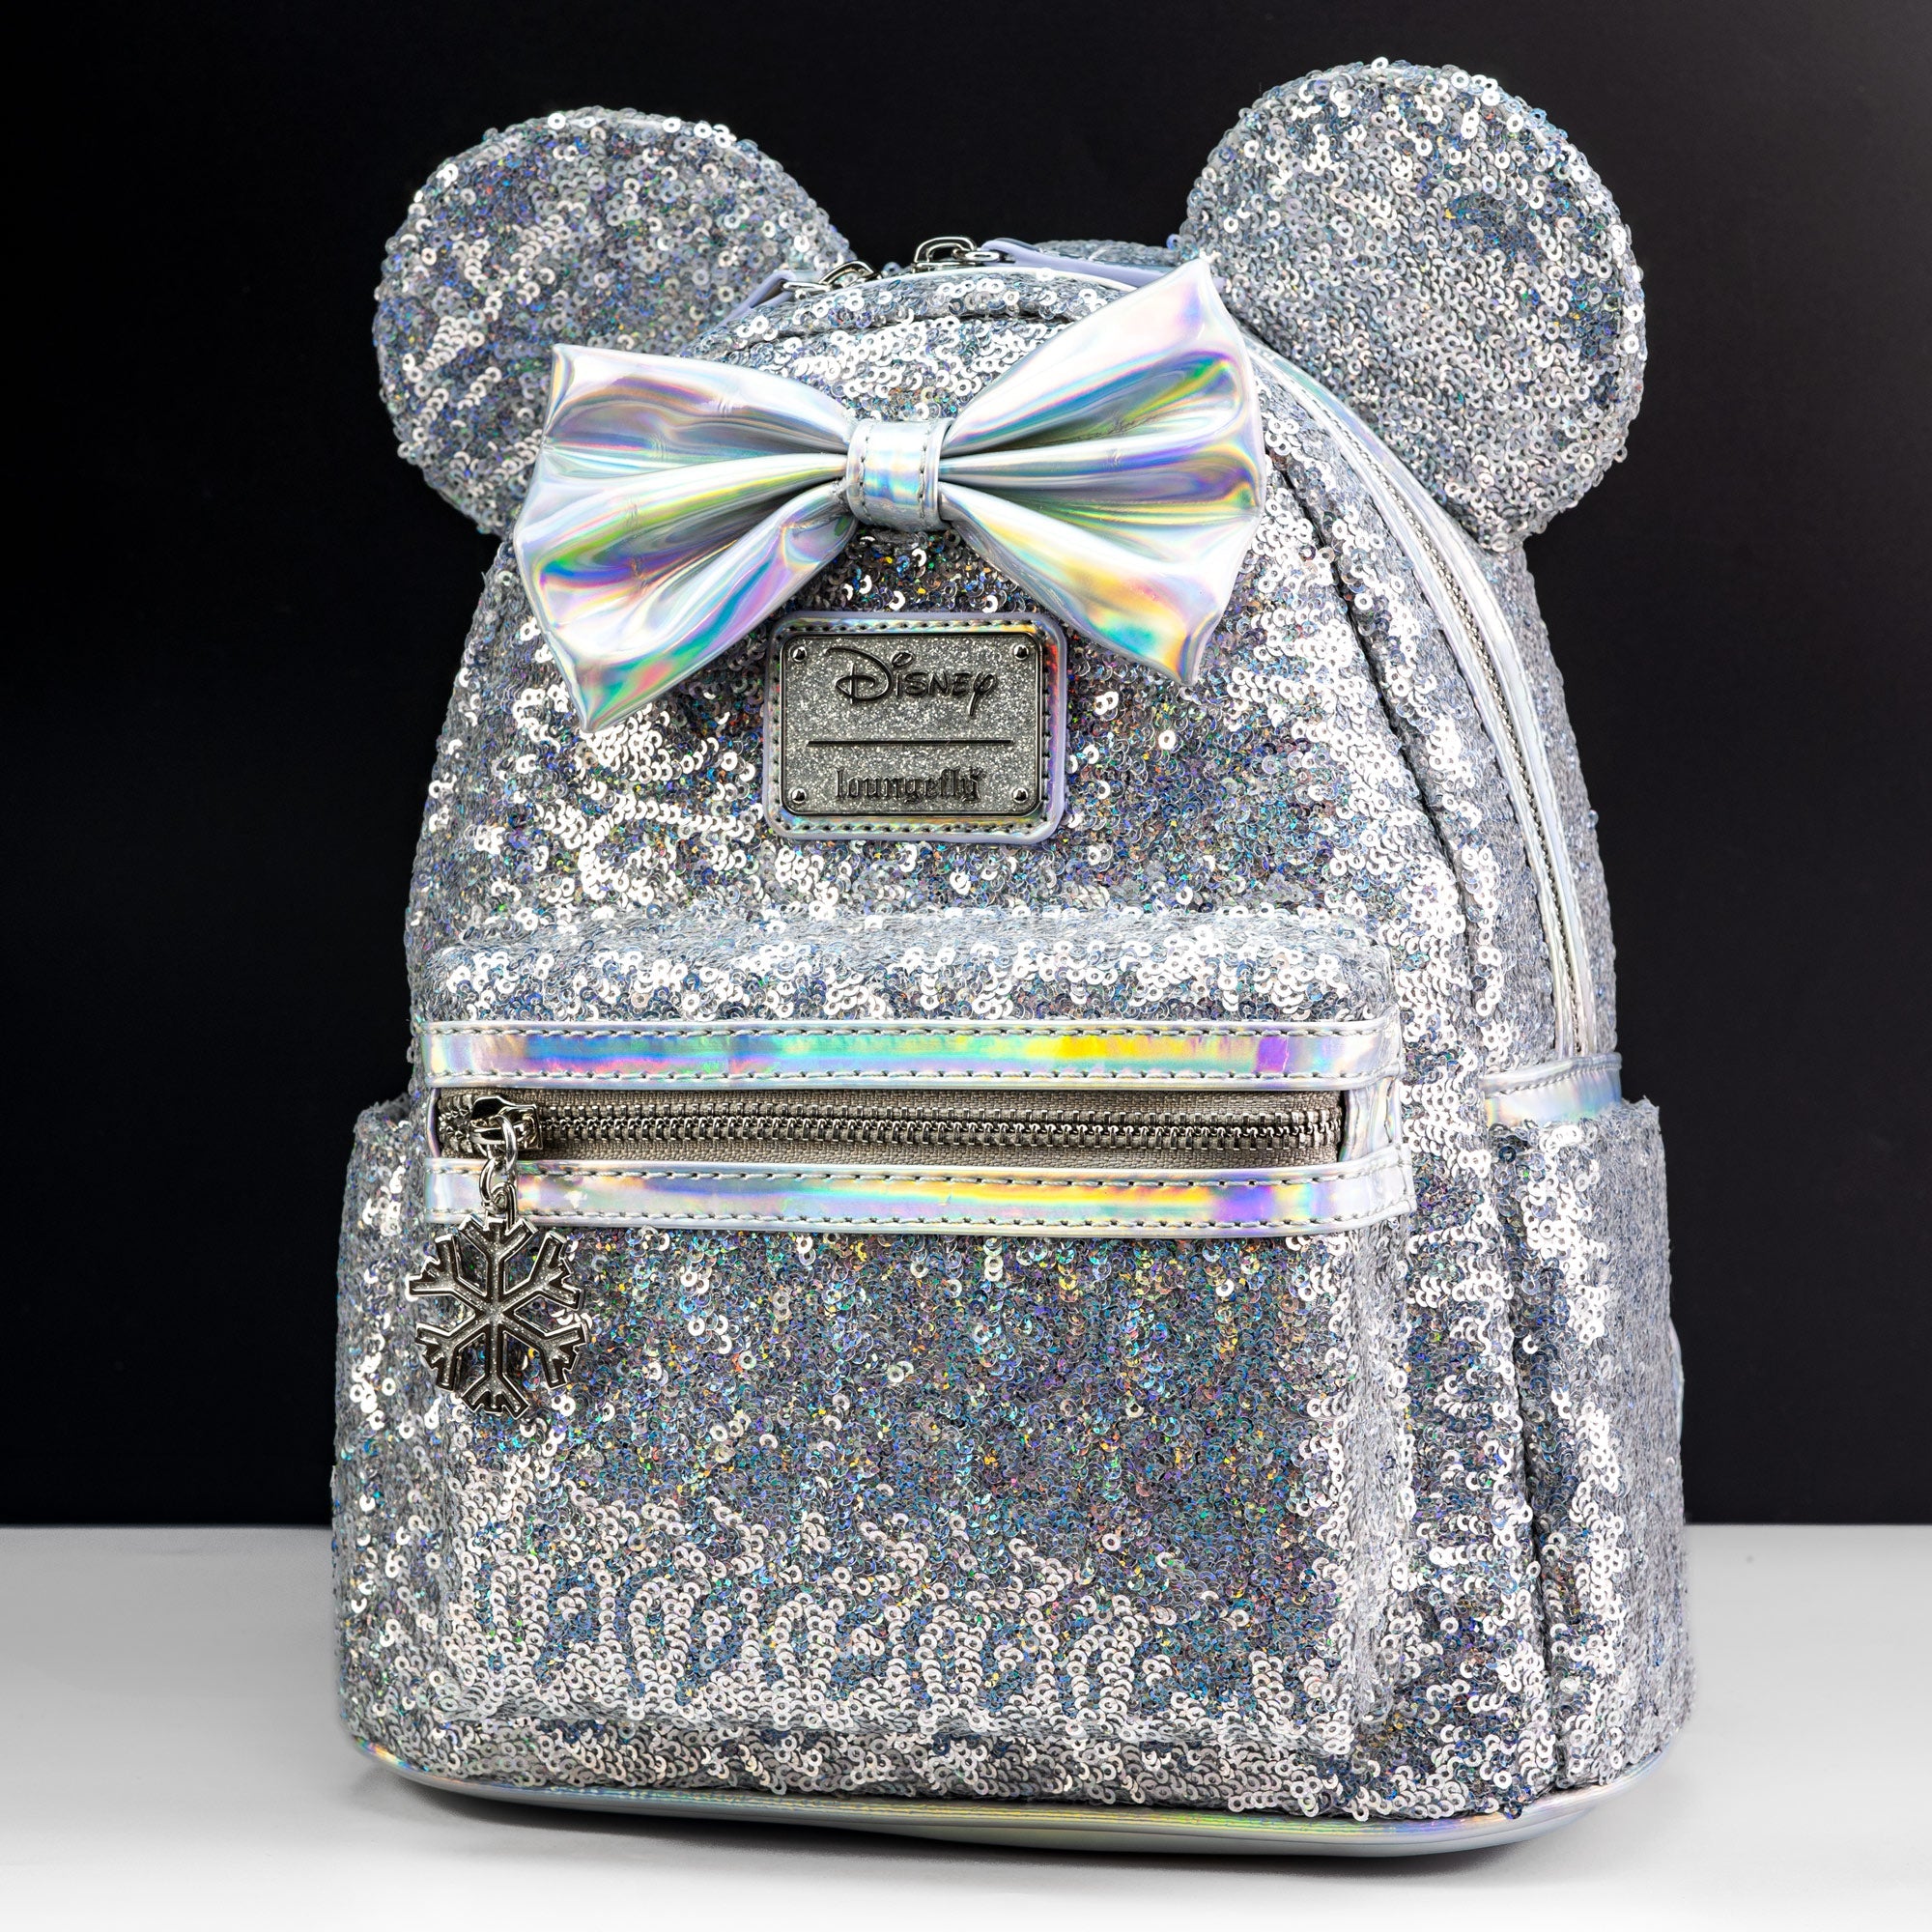 Loungefly x Disney Minnie Mouse Holographic Sequin Mini Backpack - GeekCore